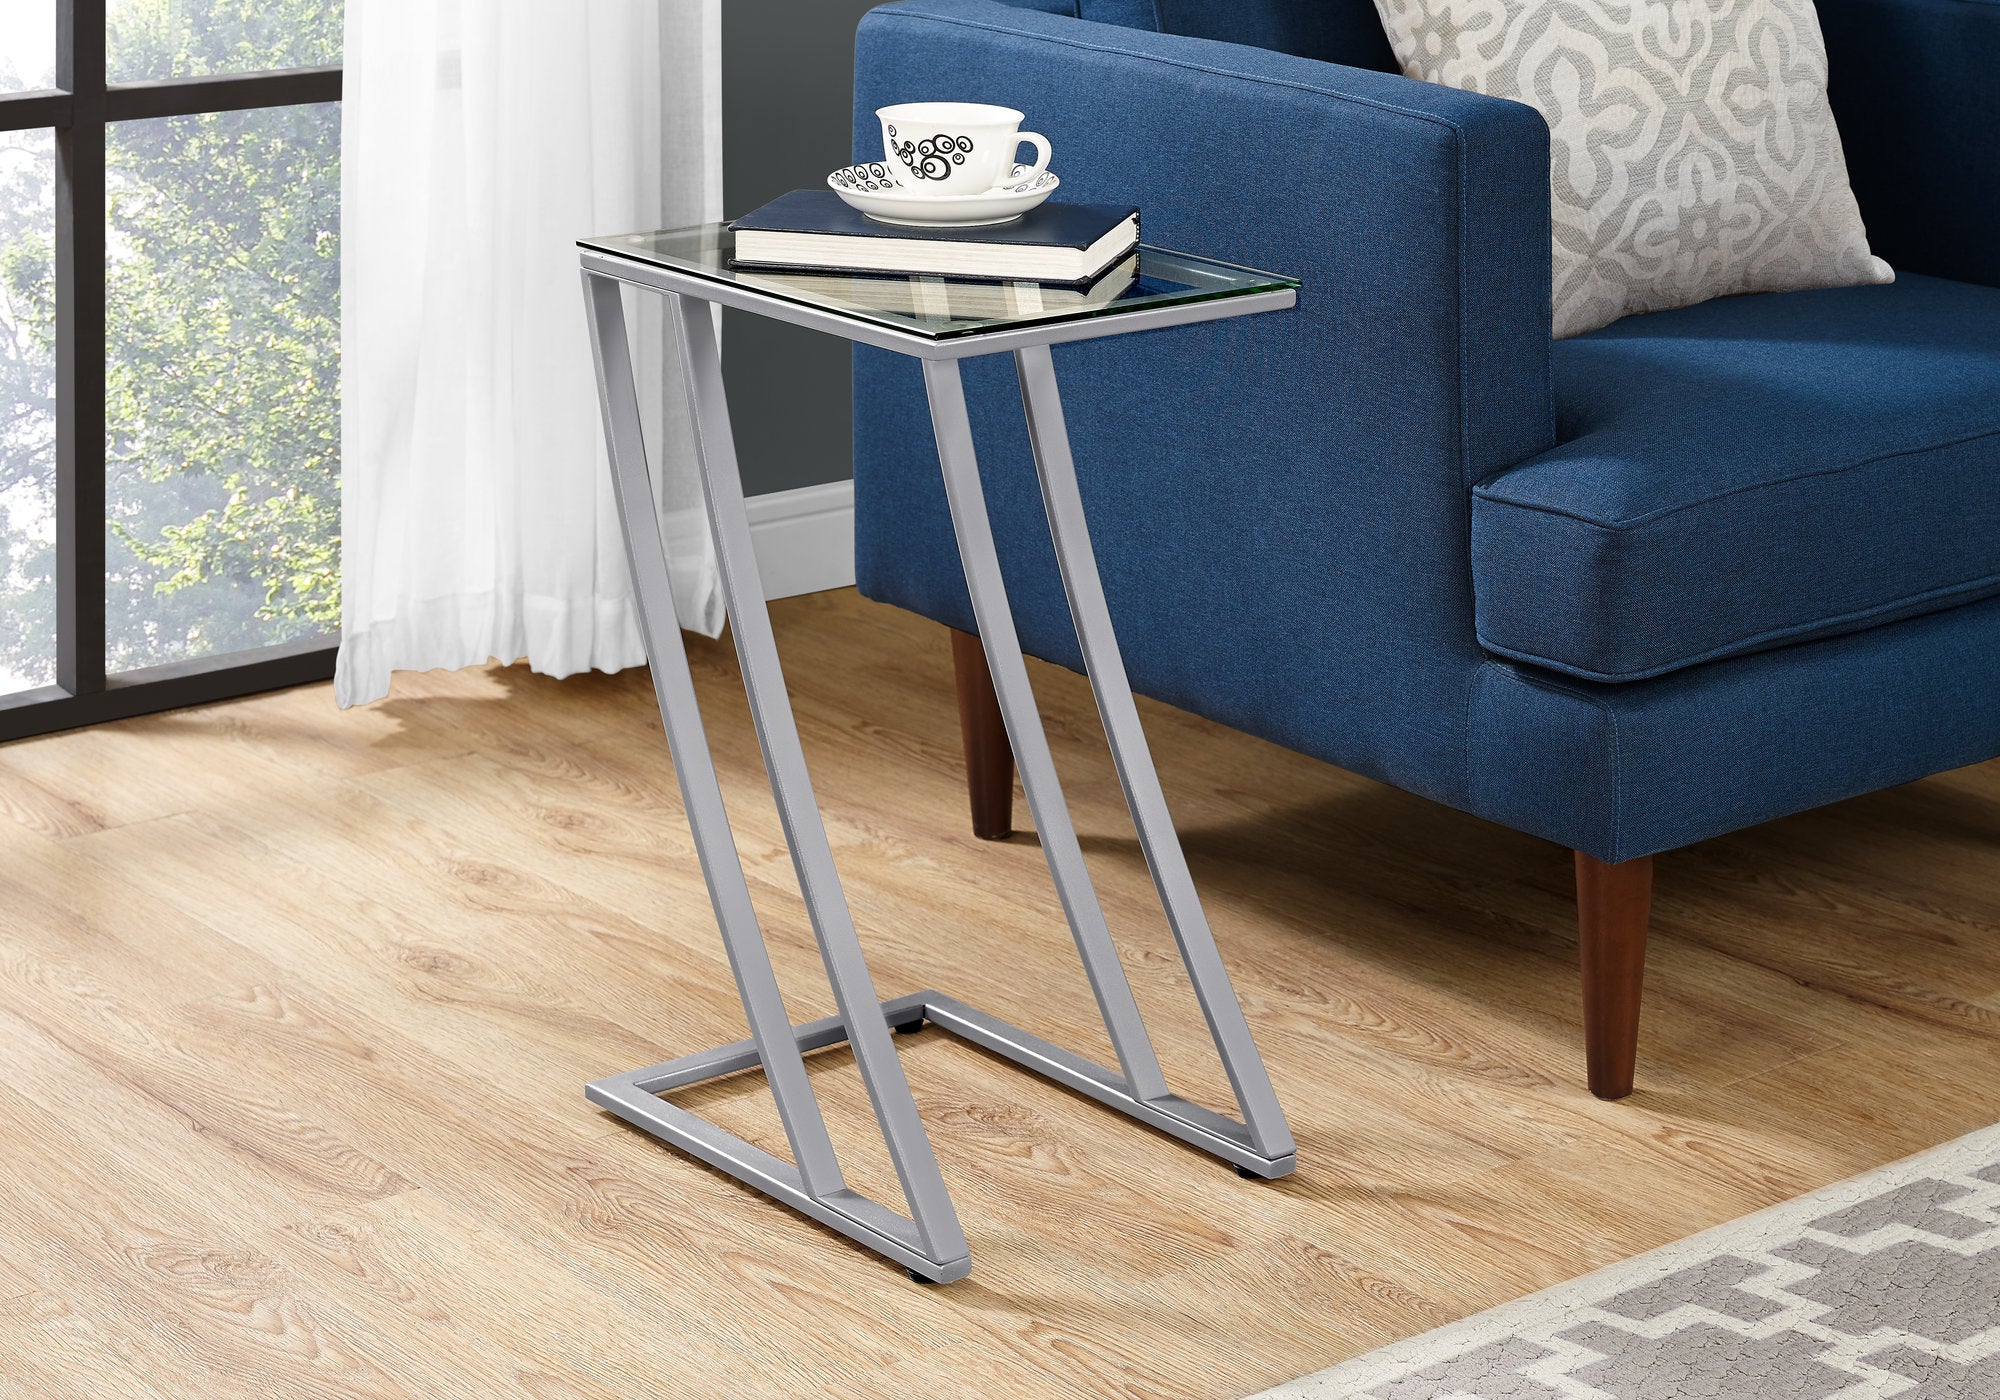 MN-203090    Accent Table, C-Shaped, End, Side, Snack, Living Room, Bedroom, Metal Base, Tempered Glass,  Grey, Contemporary, Modern